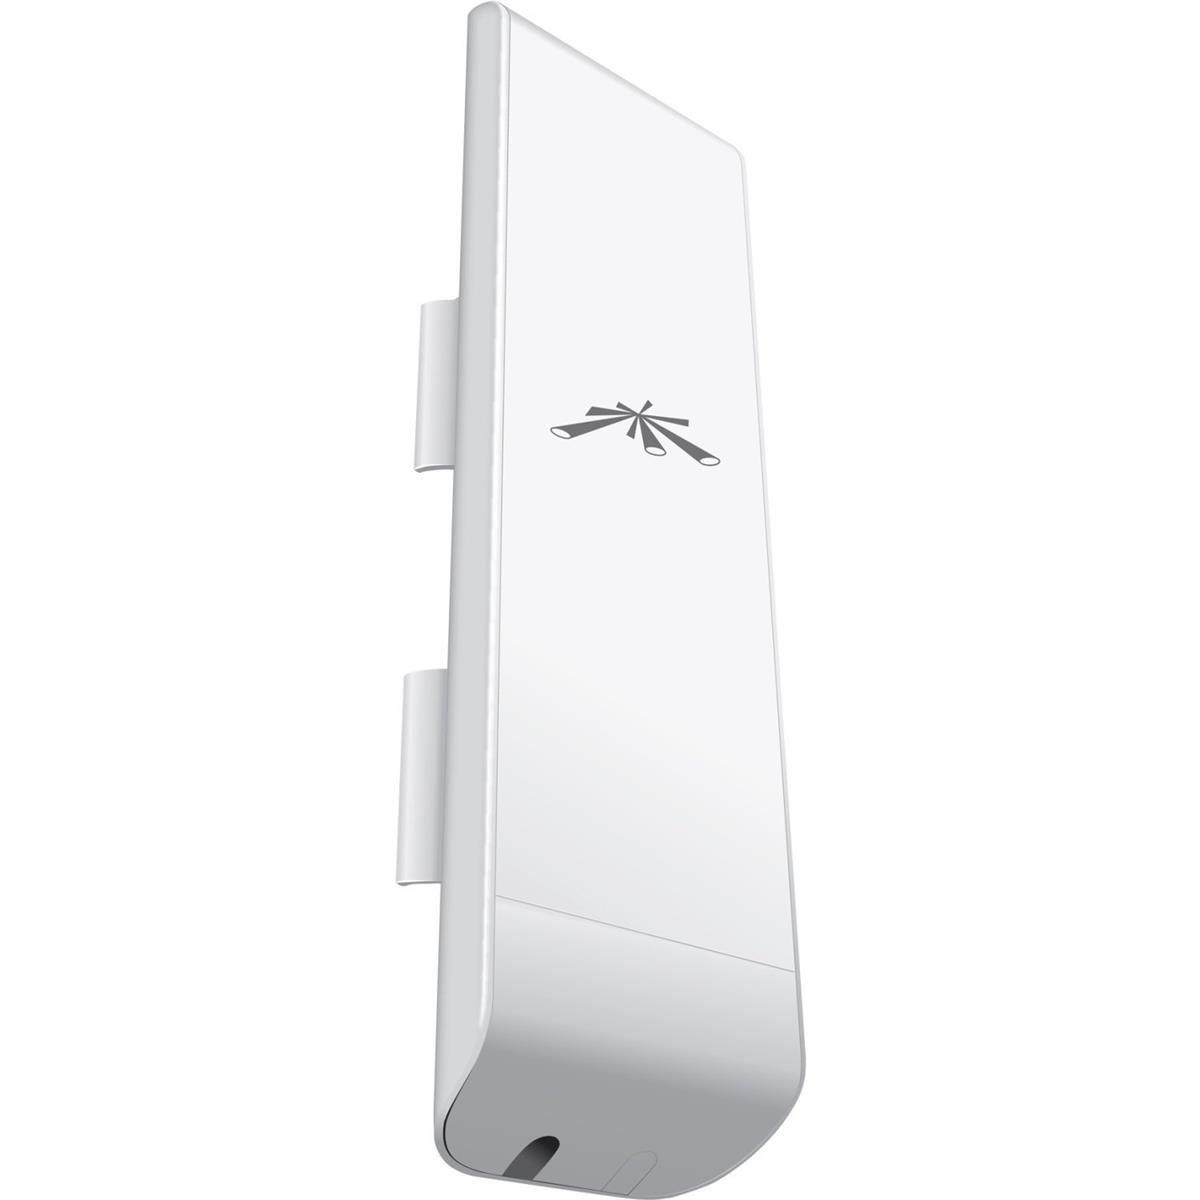 Image of Ubiquiti Networks Nanostation M 3.65GHz Indoor/Outdoor airMAX CPE Router